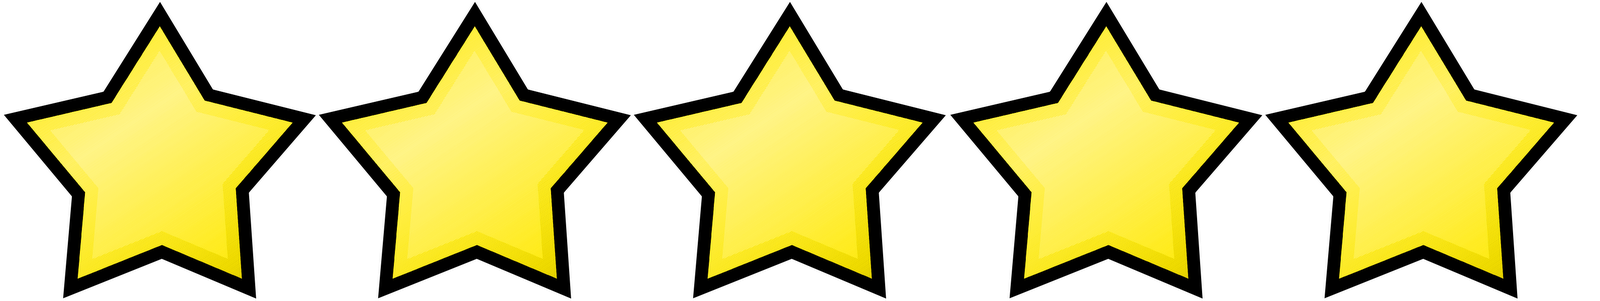 EWC Tutors: Five Stars Out of Five | Just Doing the WRITE Thing